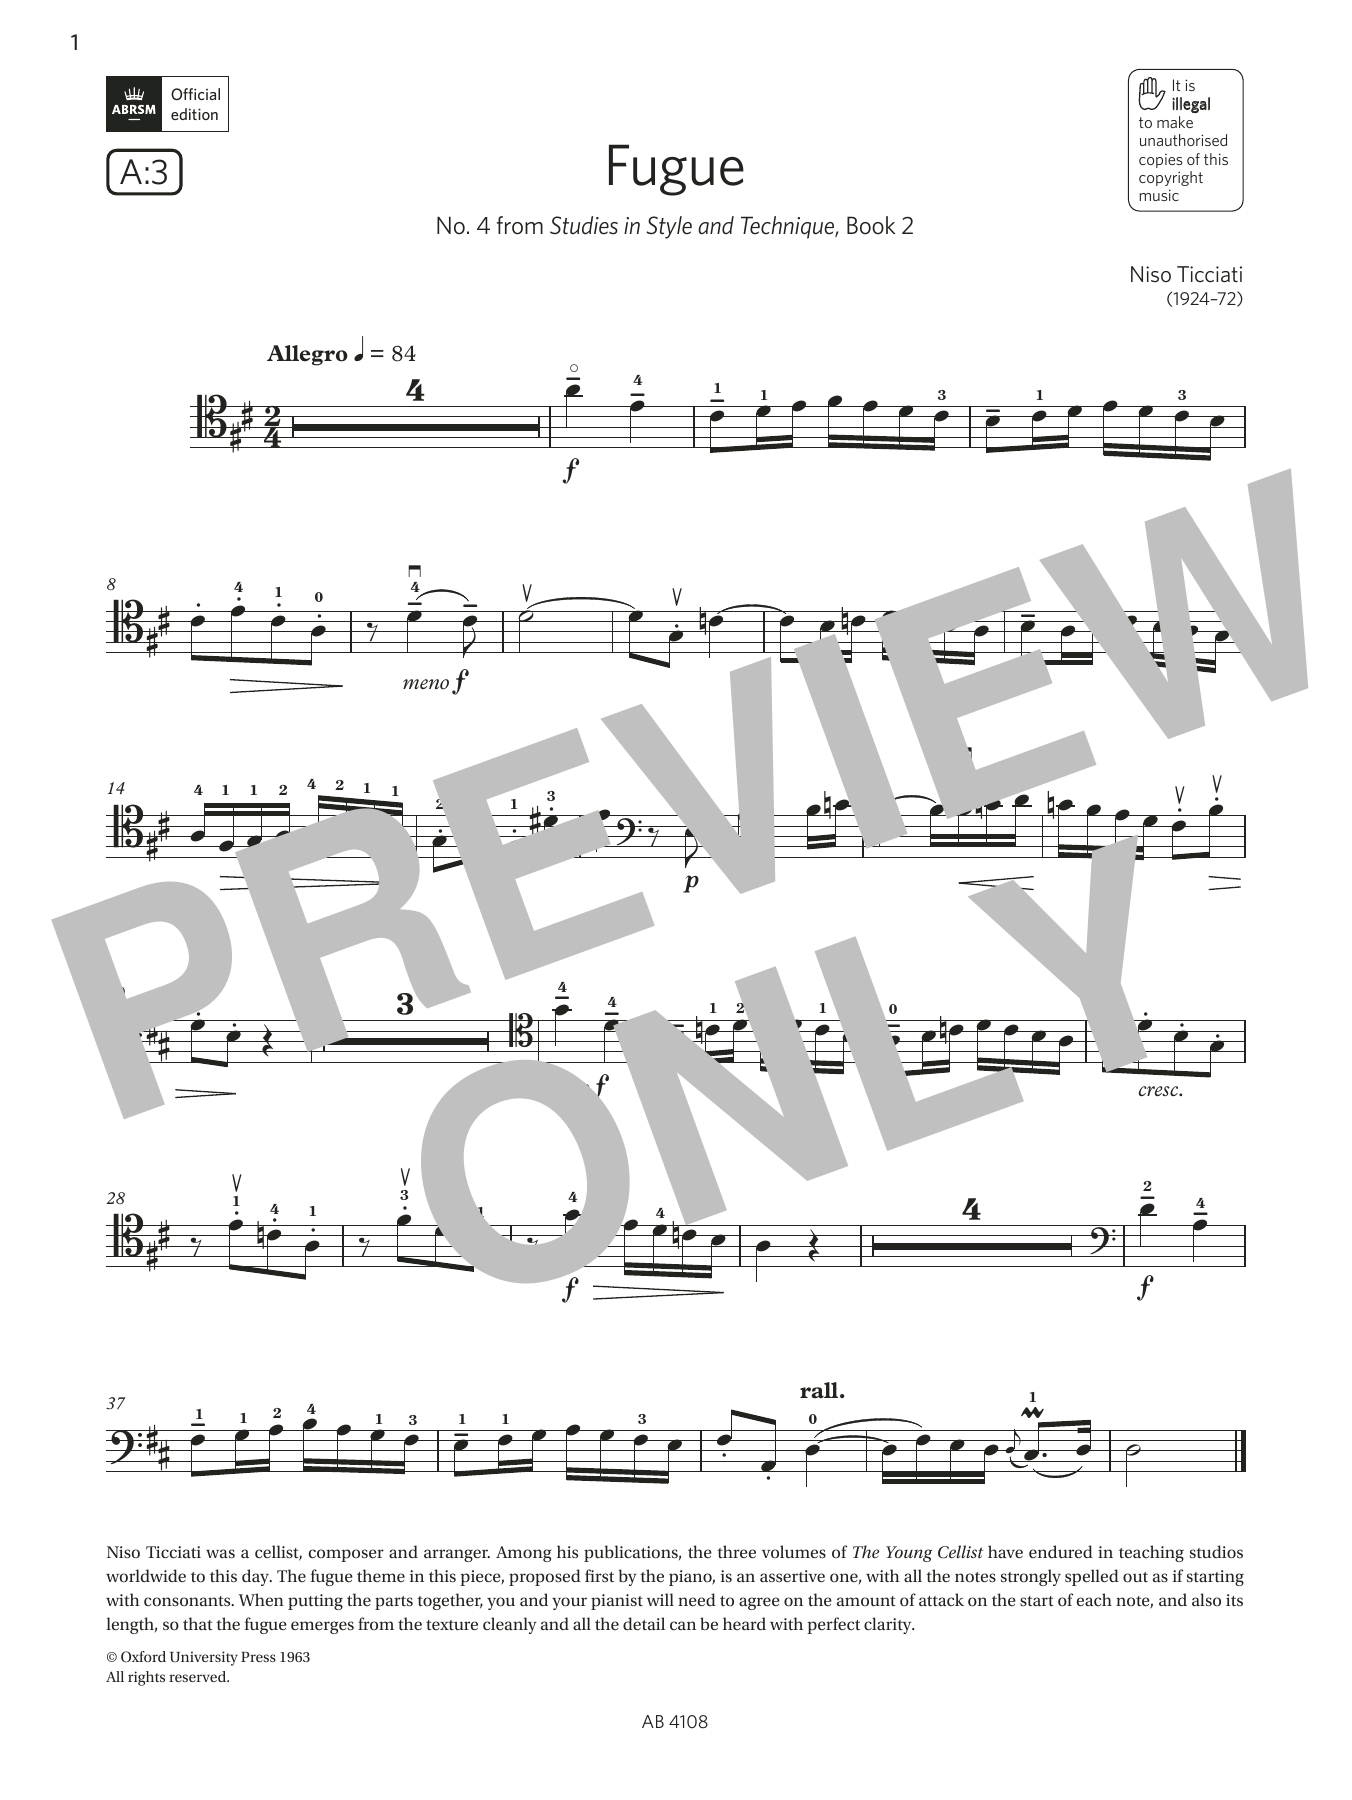 Download Niso Ticciati Fugue (Grade 5, A3, from the ABRSM Cell Sheet Music